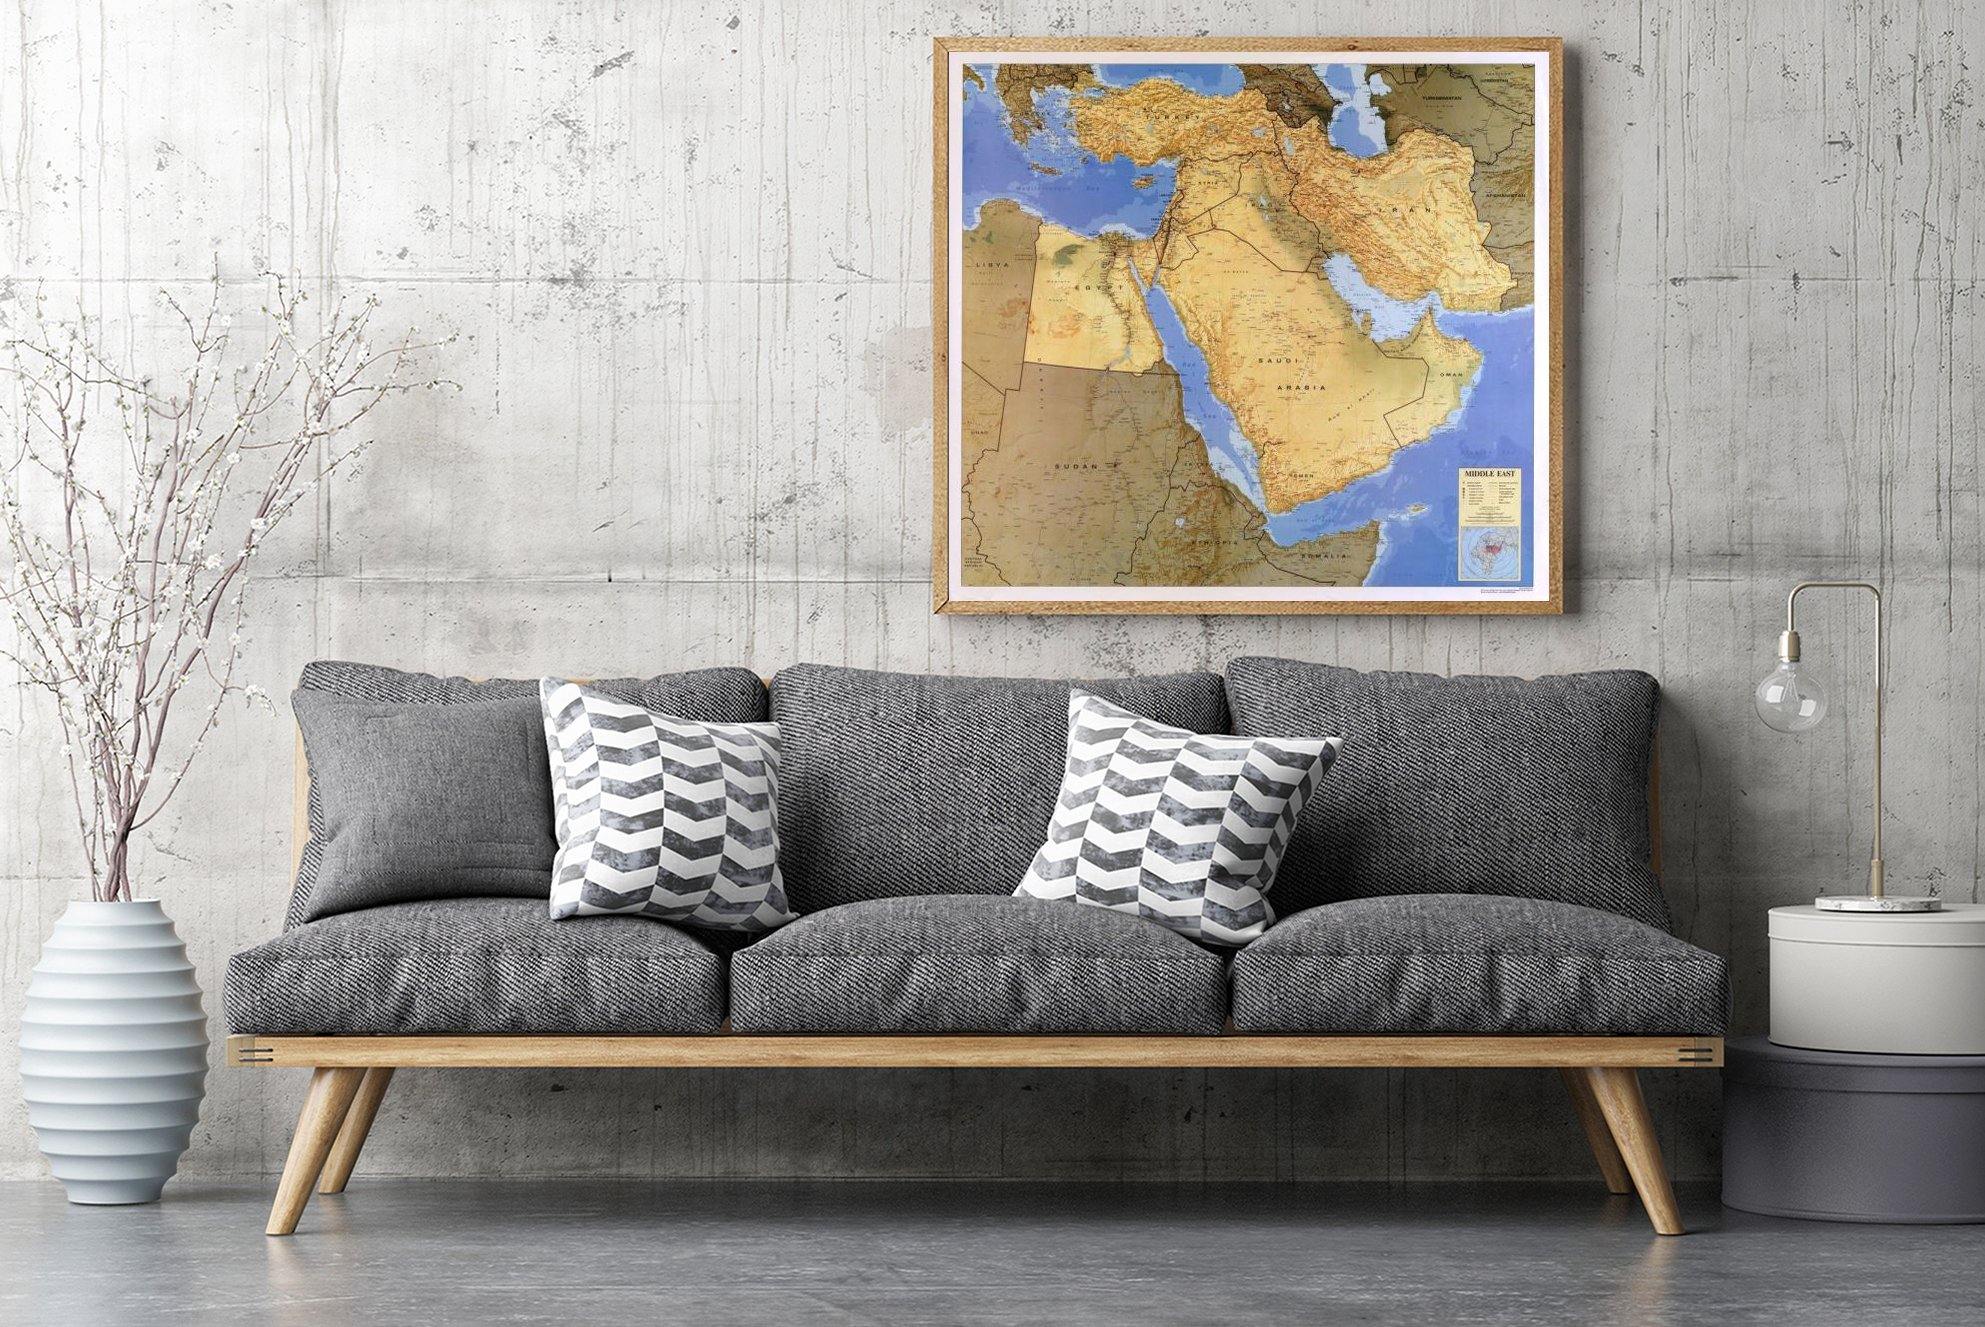 1993 Map| Middle East| Airports|Middle East Map Size: 22 inches x 24 i - New York Map Company